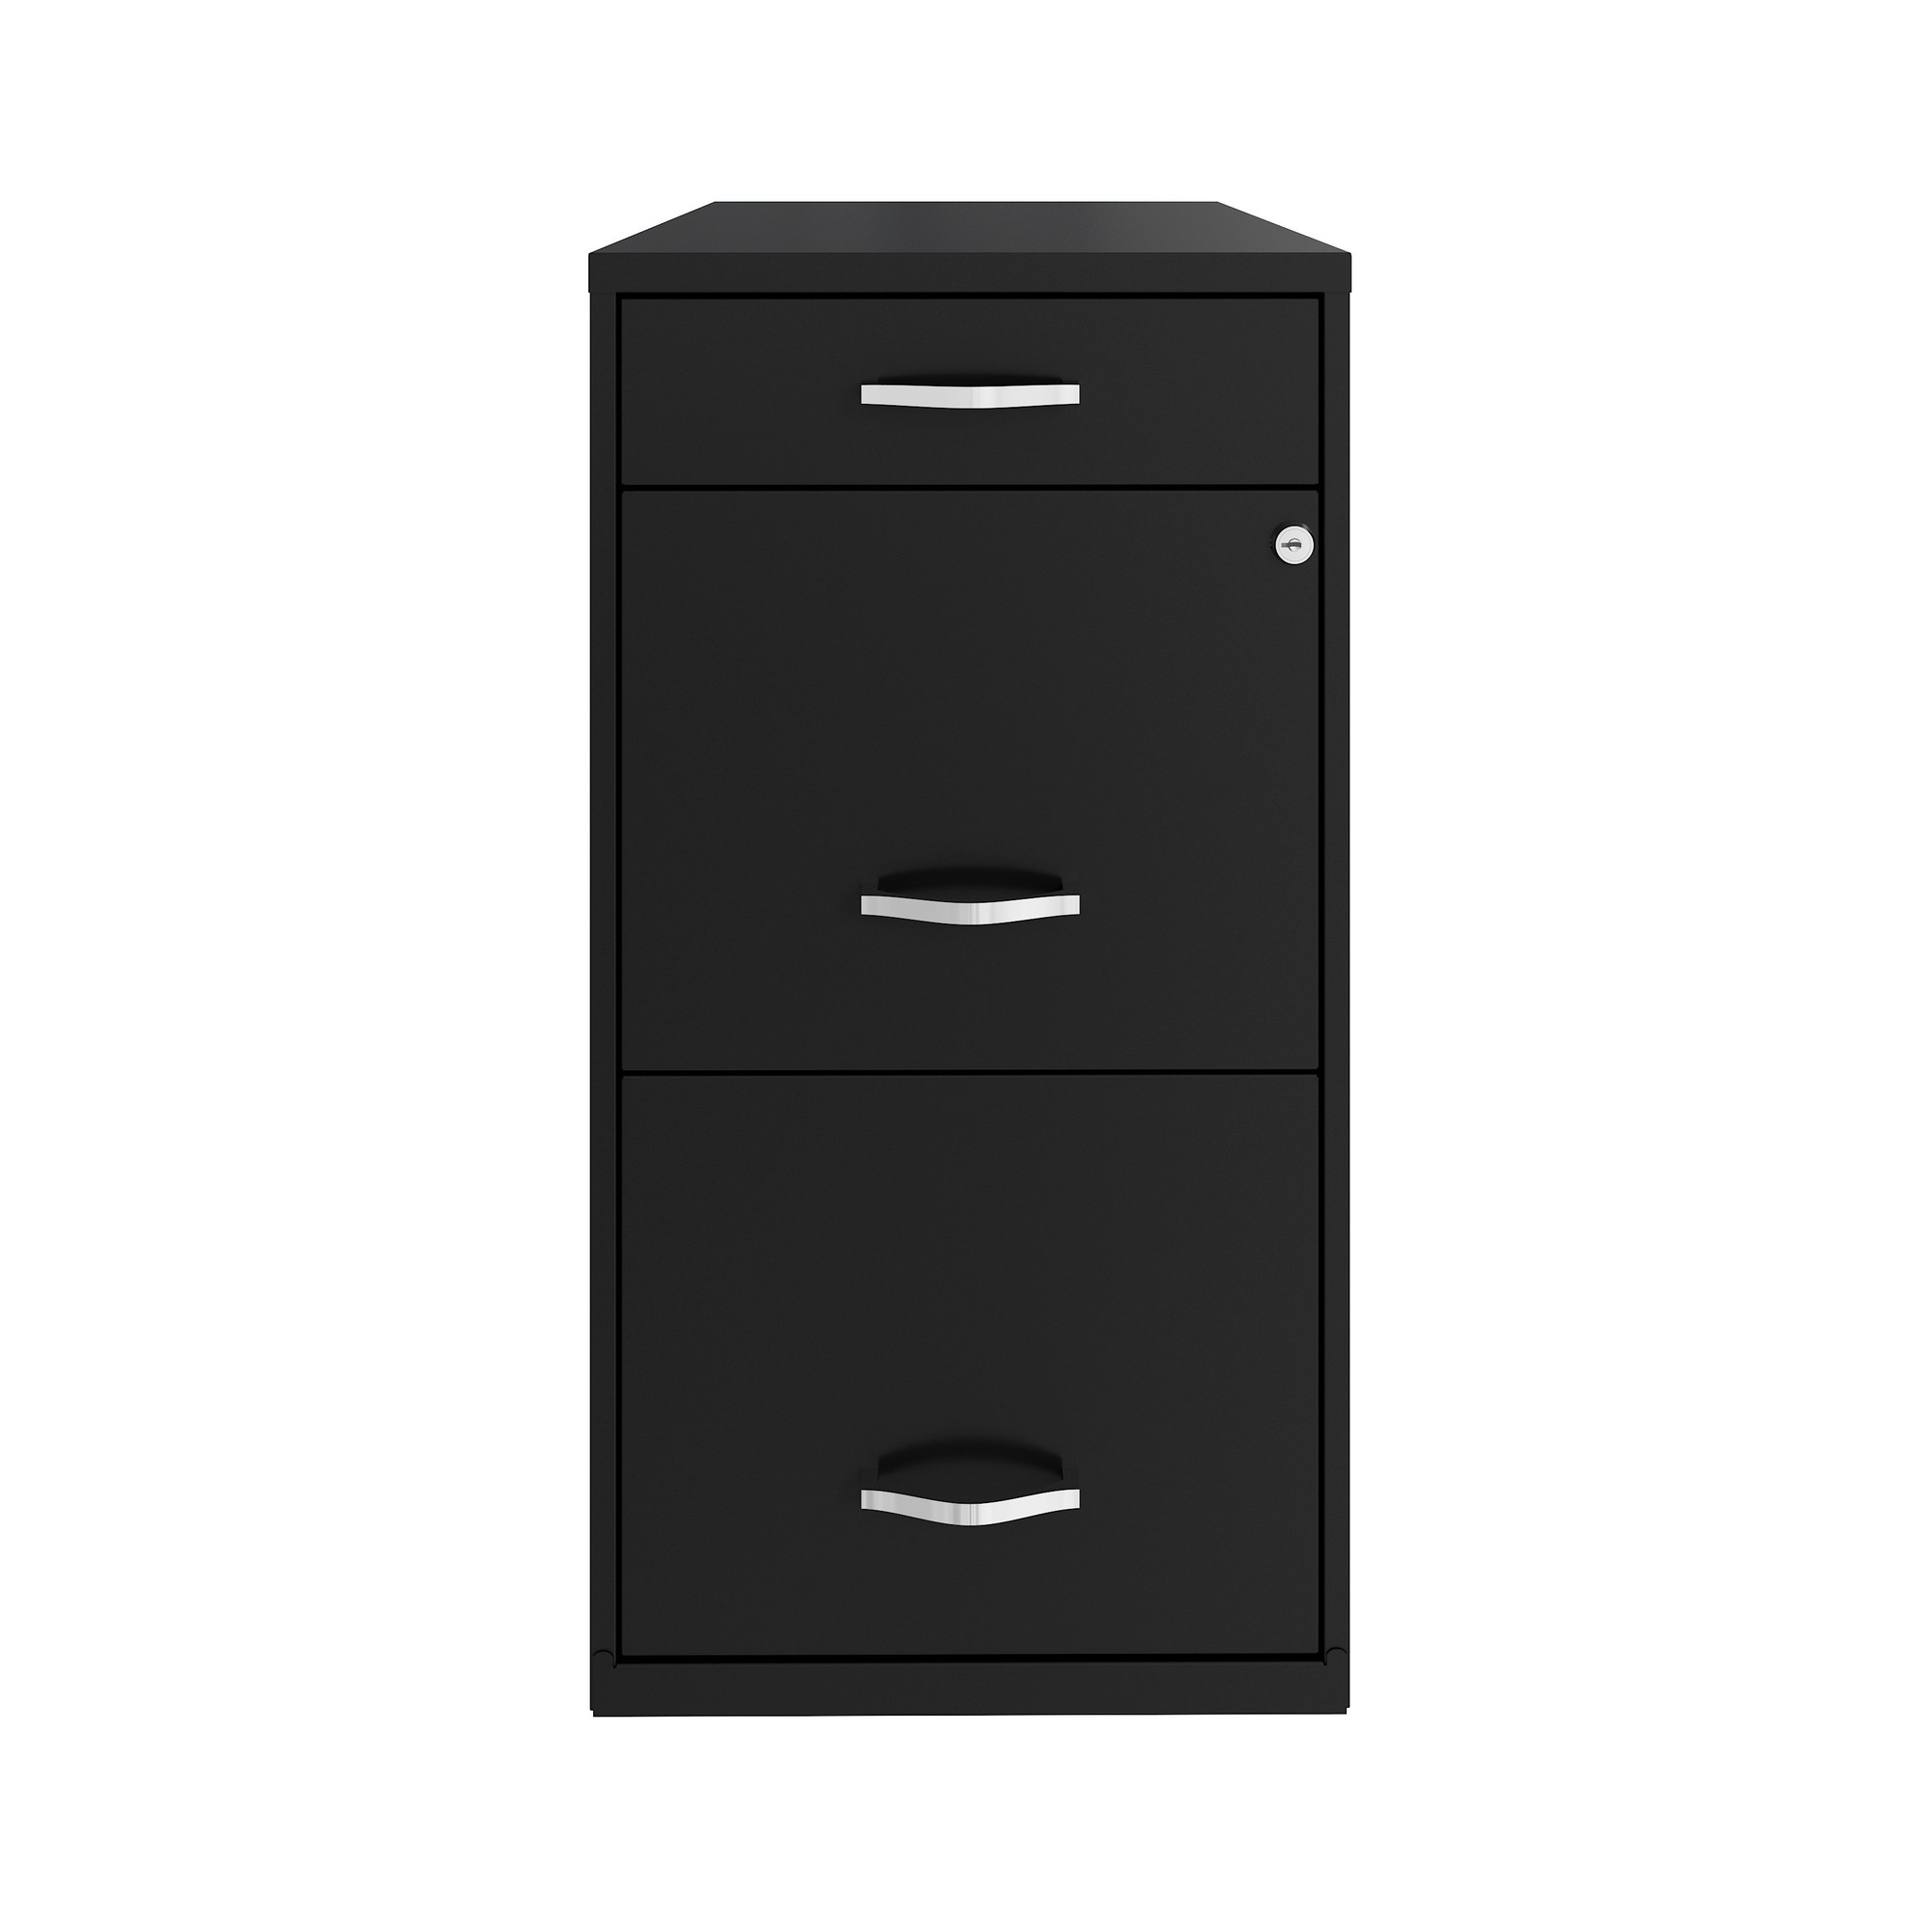 Hirsh Industries, 3 Drawer Letter Width File Cabinet, Pencil Drawer, Width 14.25 in, Depth 18 in, Height 27.32 in, Model 24411